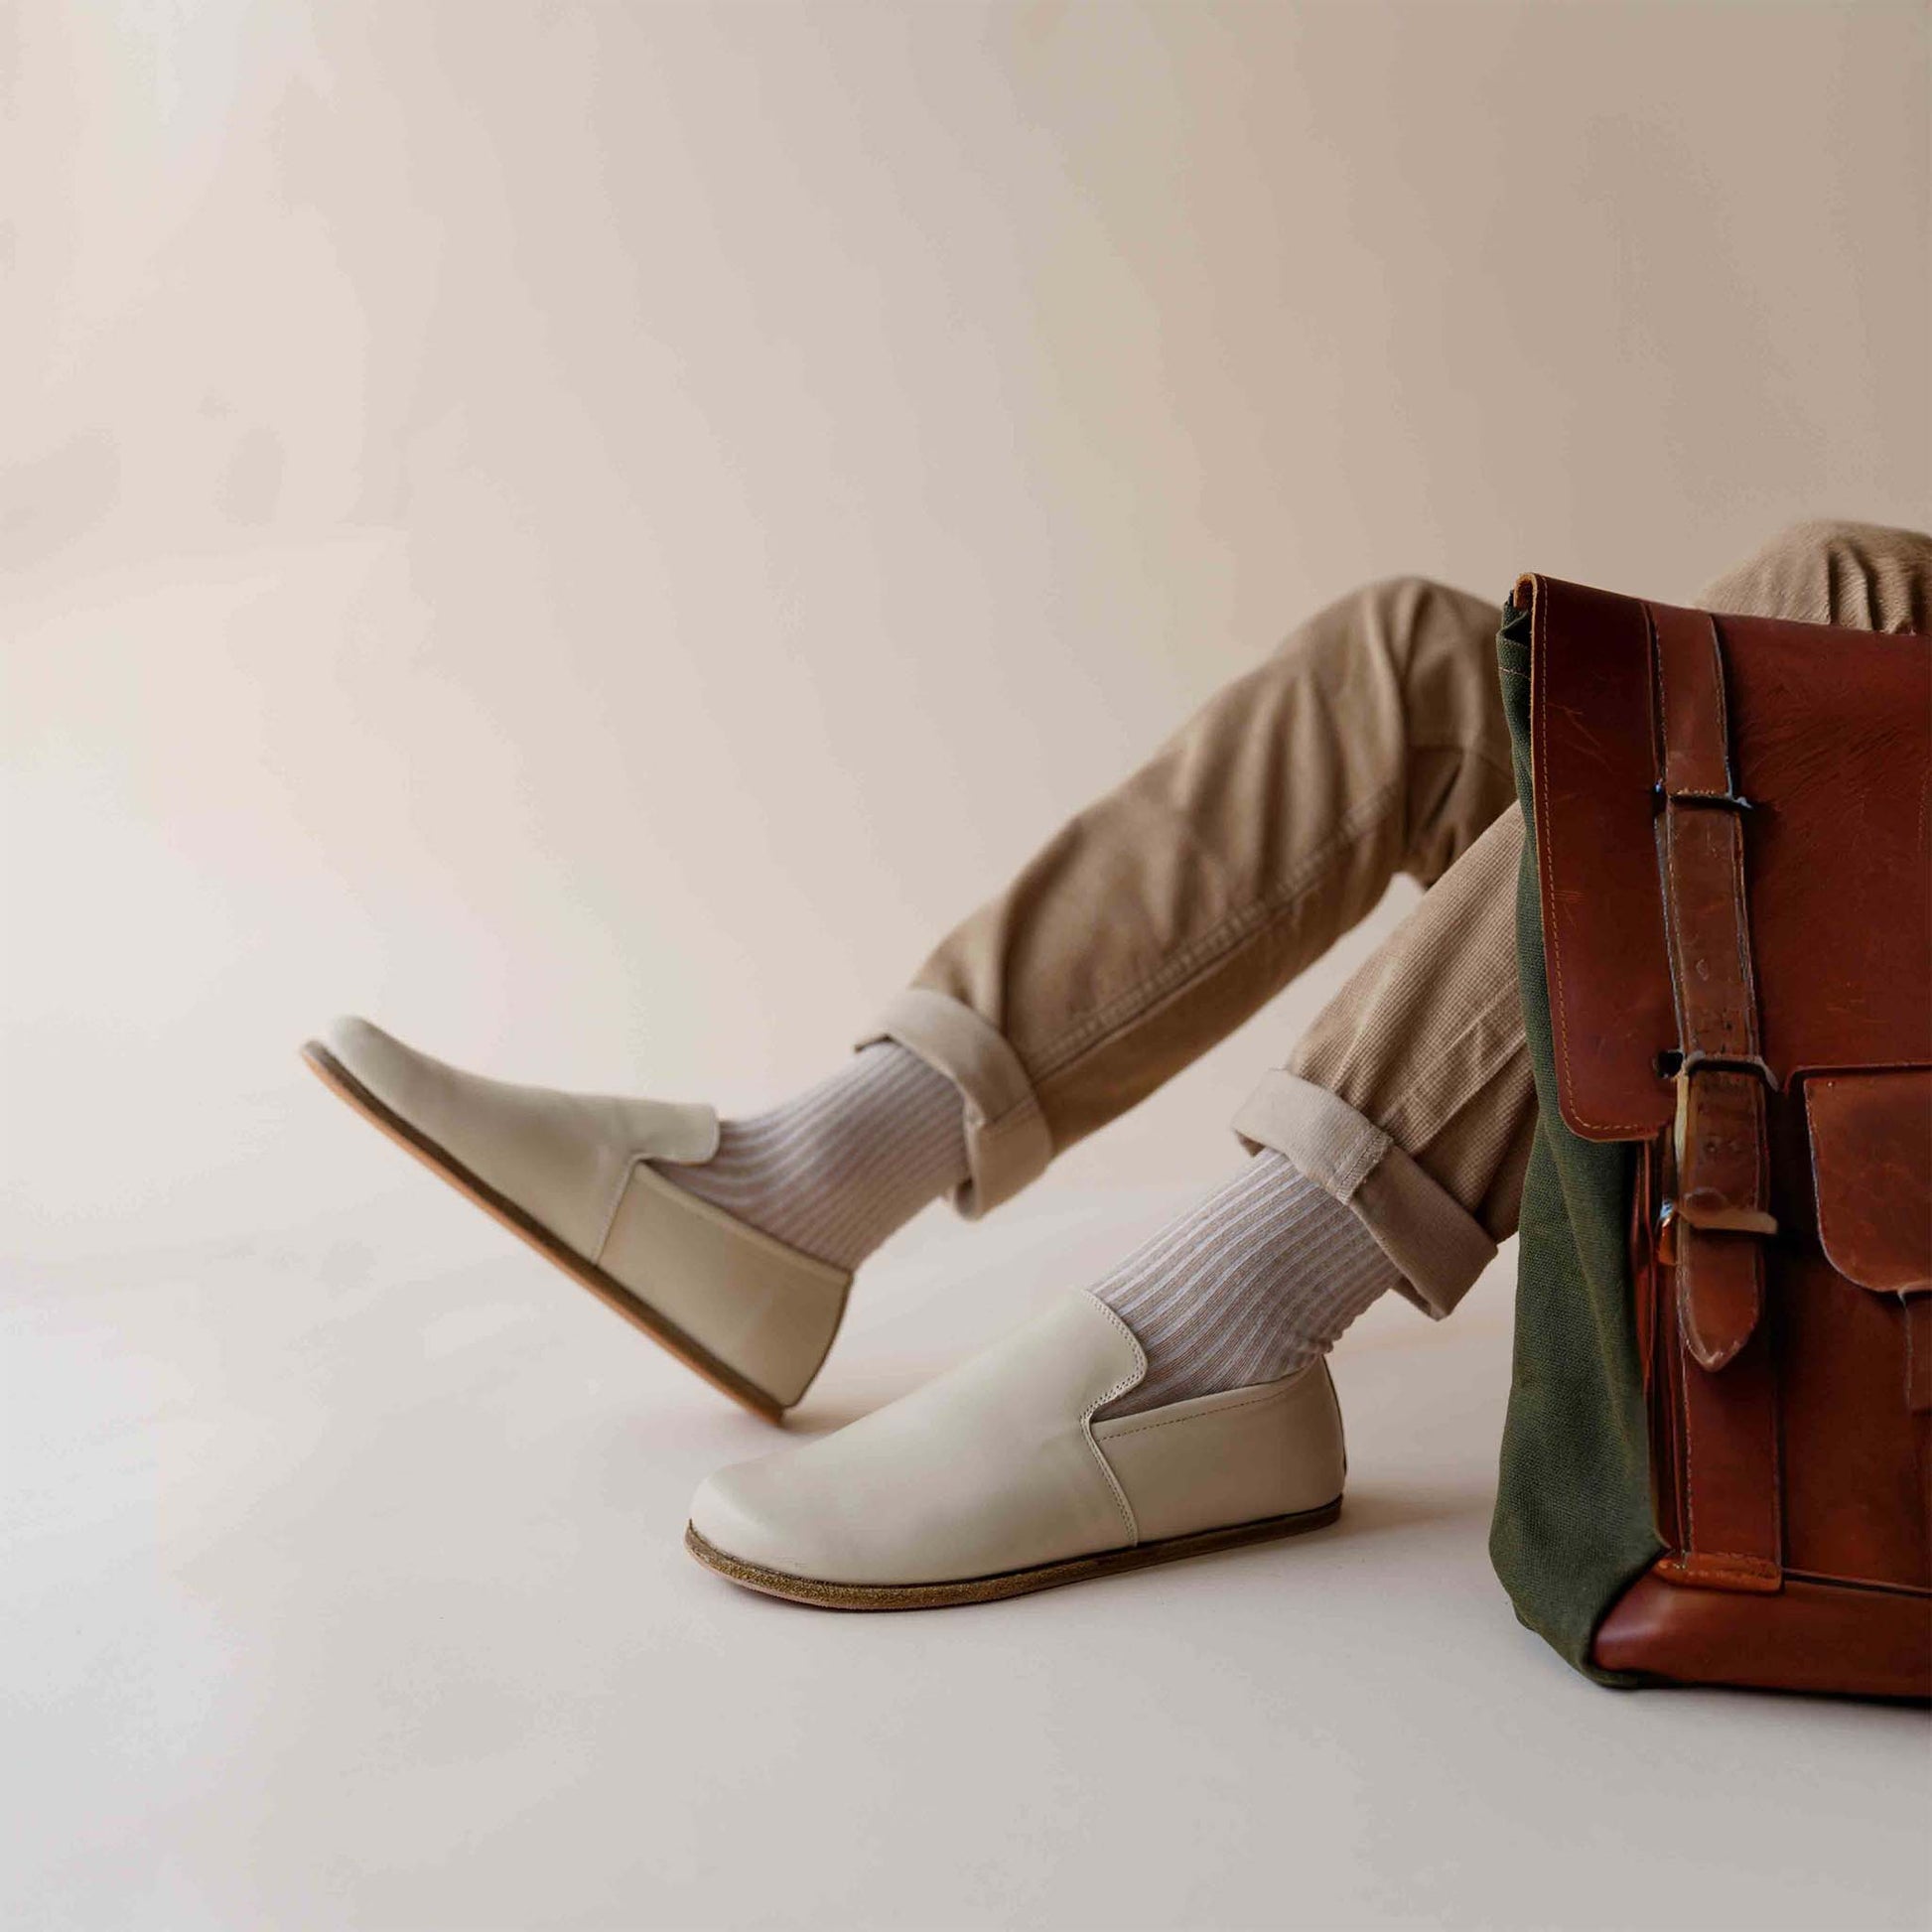 Relaxed look featuring beige Aeolia Leather Barefoot Men's Loafers and a brown leather backpack. Shop at pelanir.com!